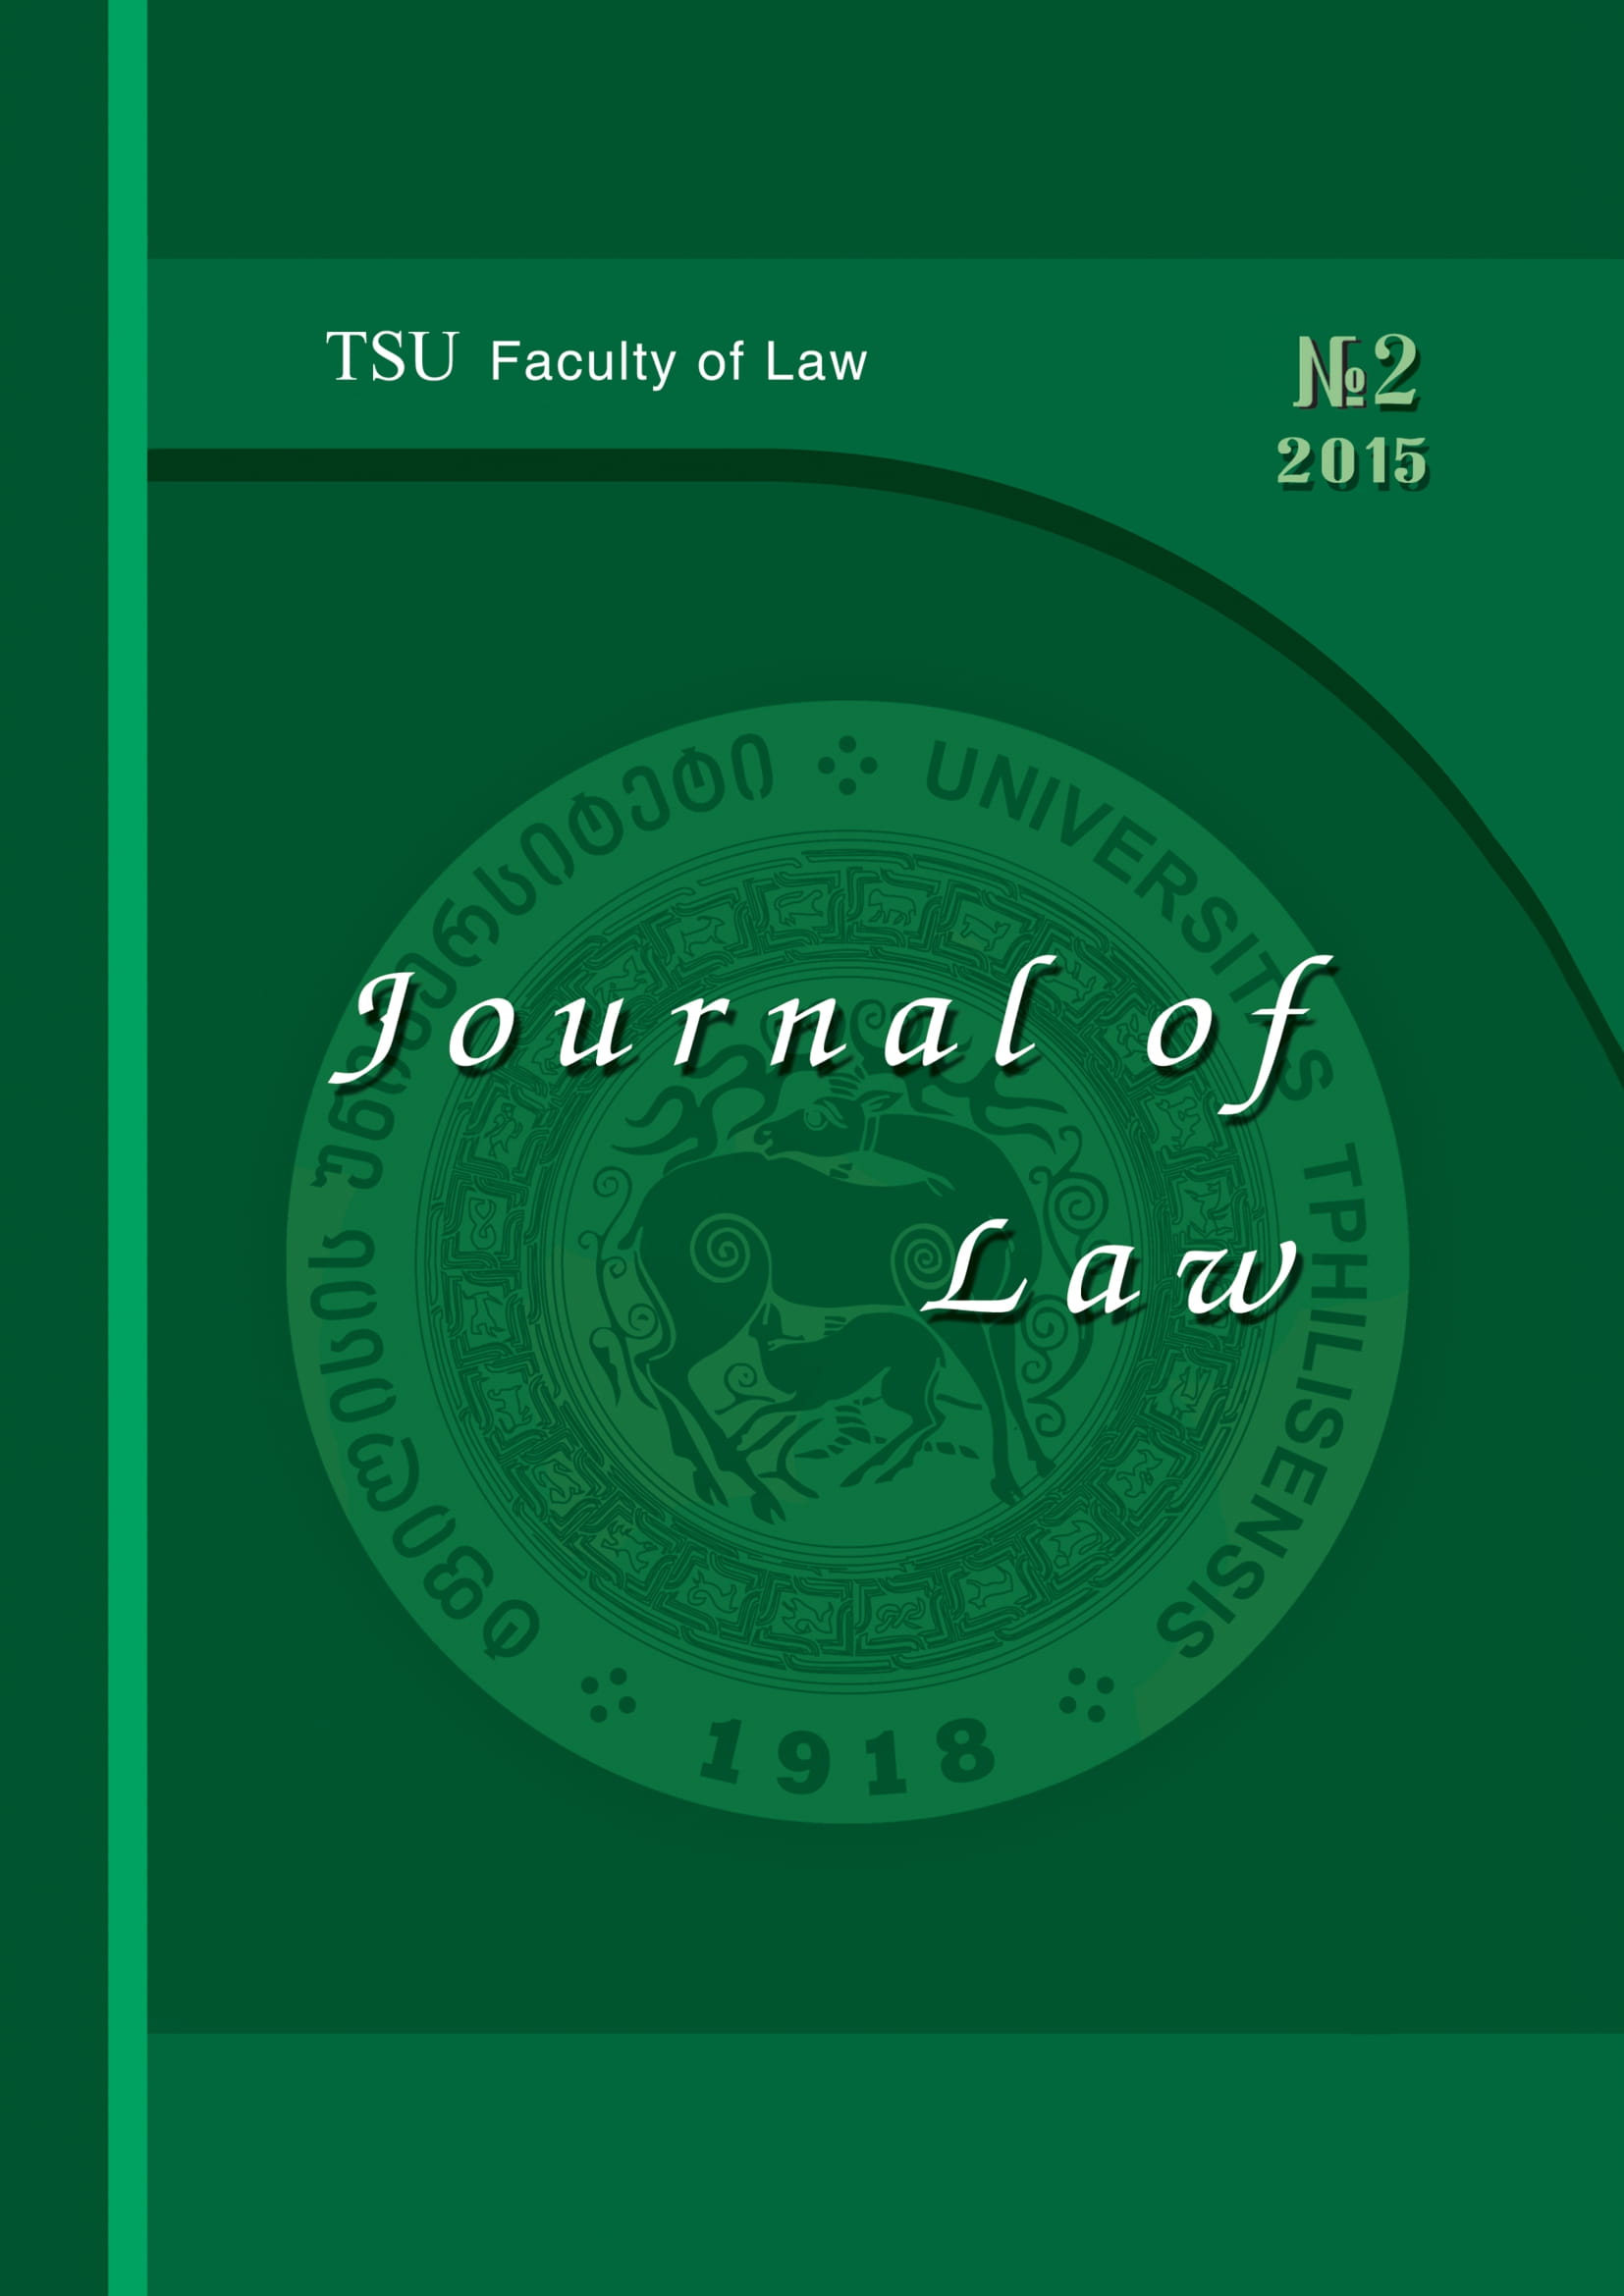 					View No. 2 (2015): Journal of Law
				